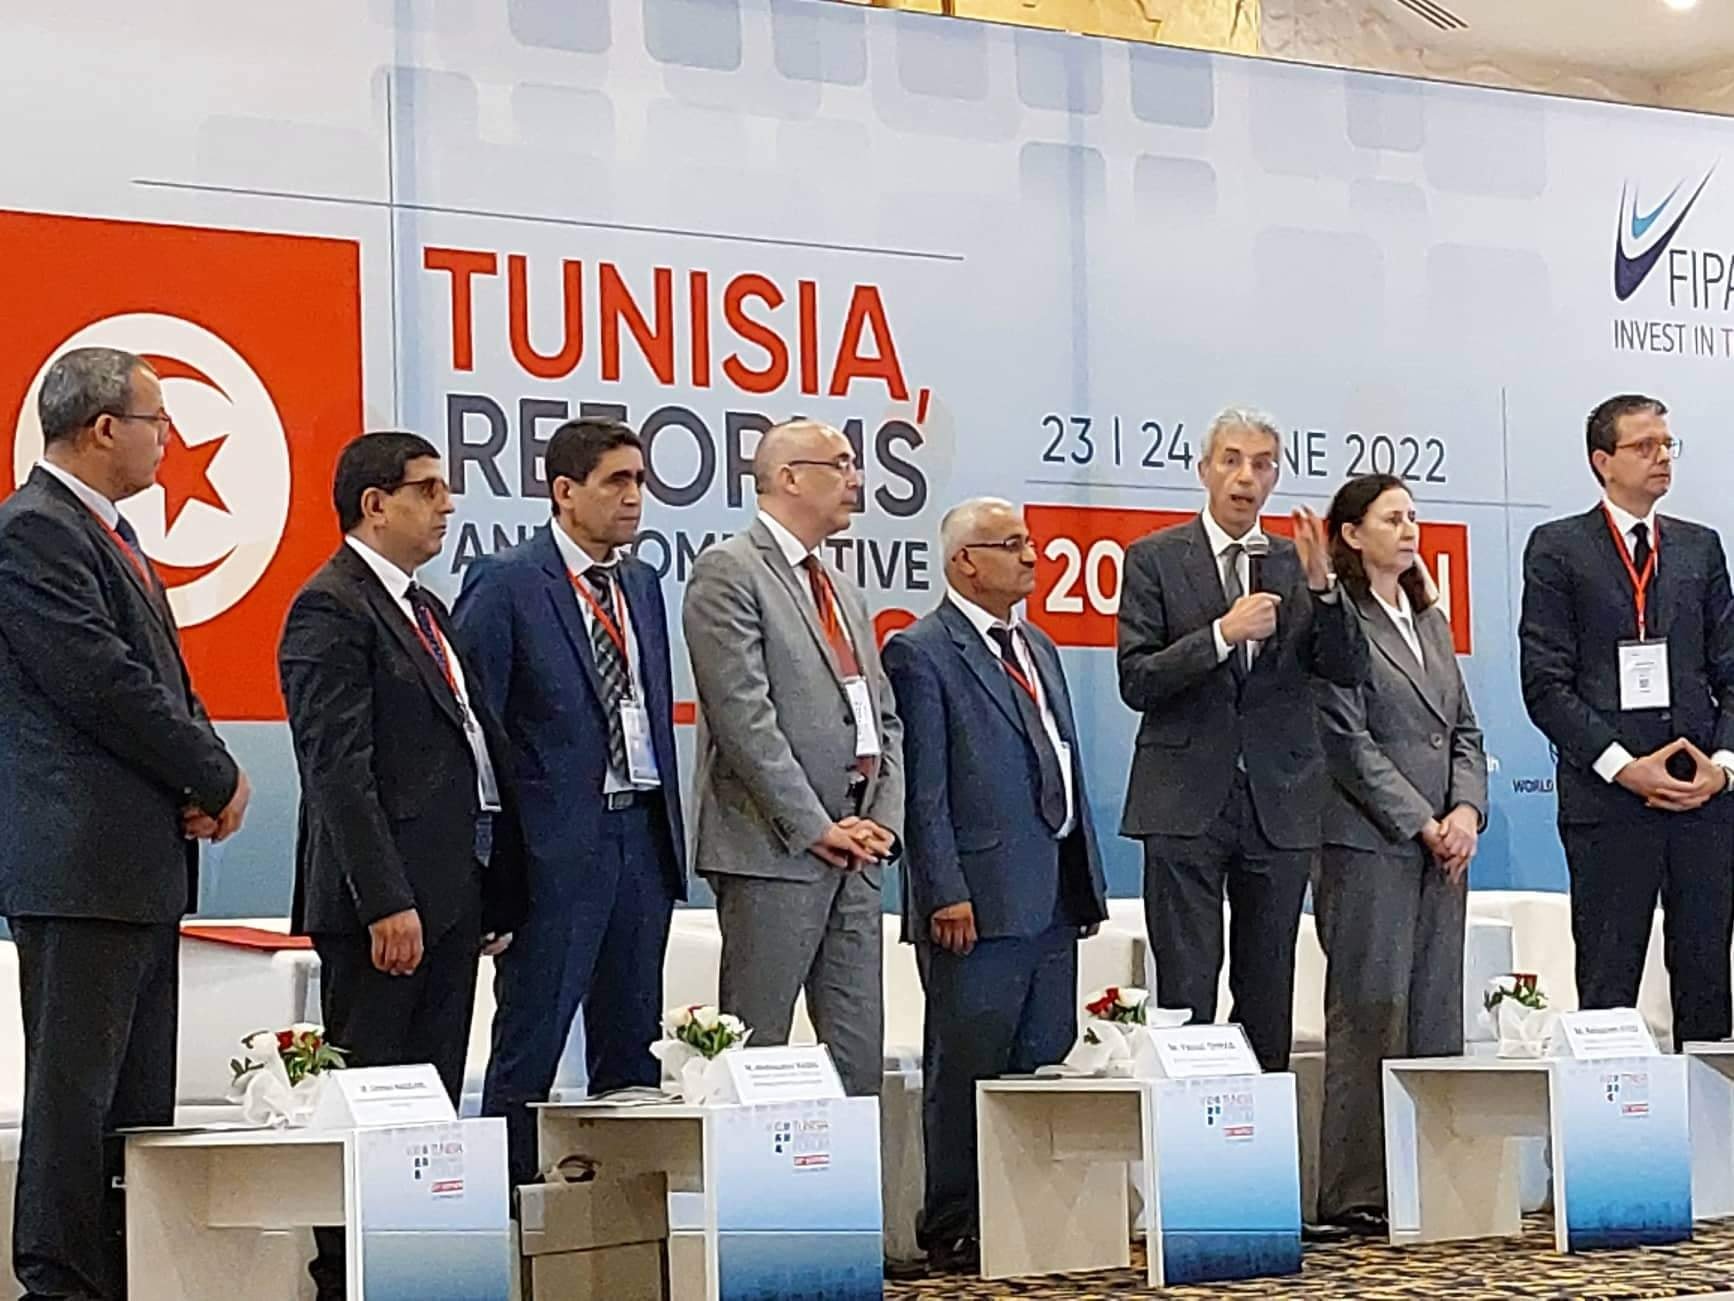 You are currently viewing Forum d’Investissement Tunisie, 23 et 24 juin 2022